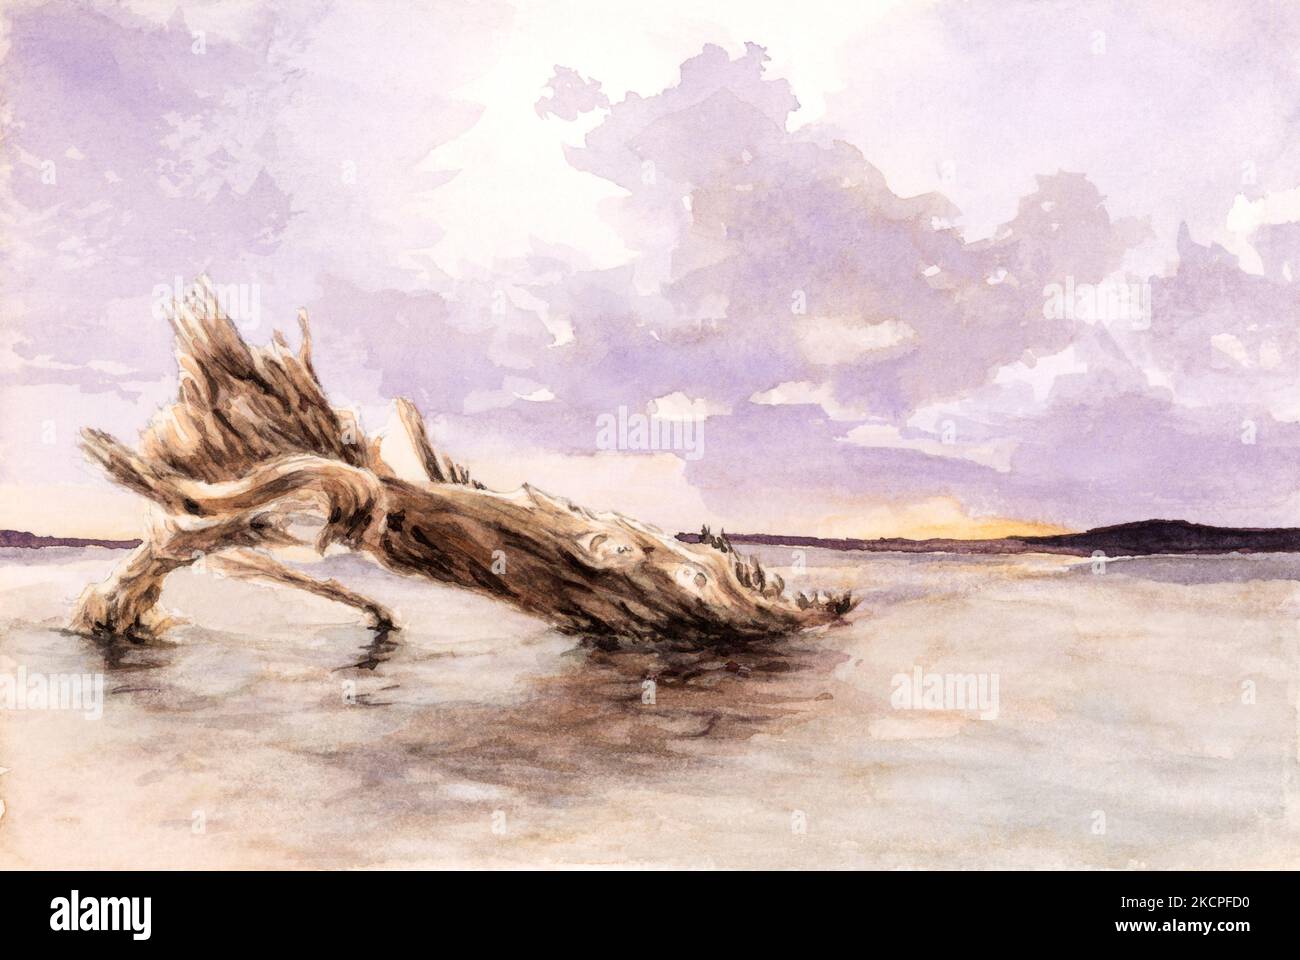 Dead tree trunk on a beach. Watercolor on paper. Stock Photo